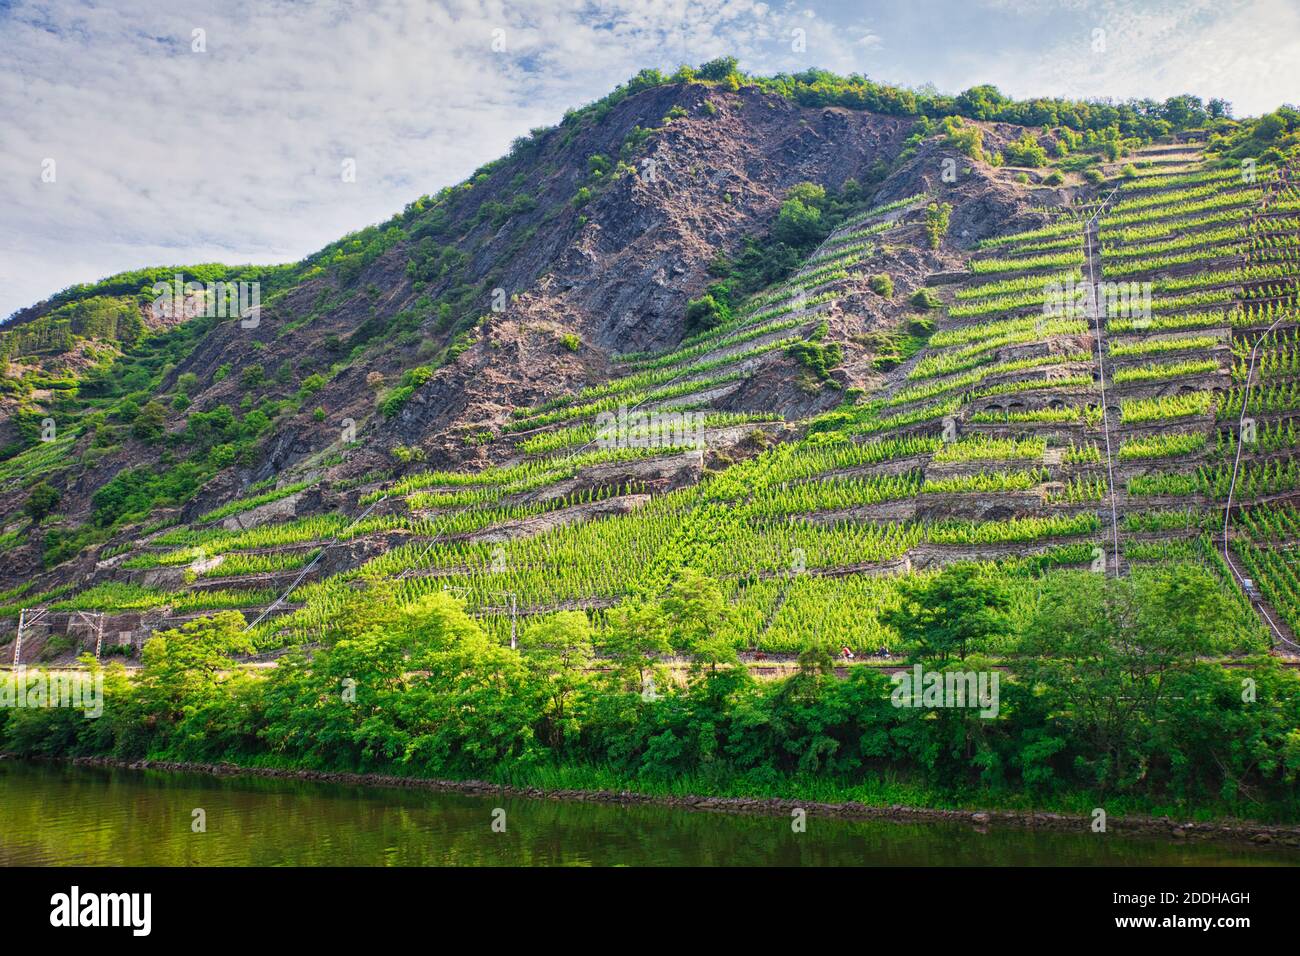 South facing slopes on the banks of the River Rhine in Germany getting the sunshine on the cultivated hillside which slope down to the river Stock Photo